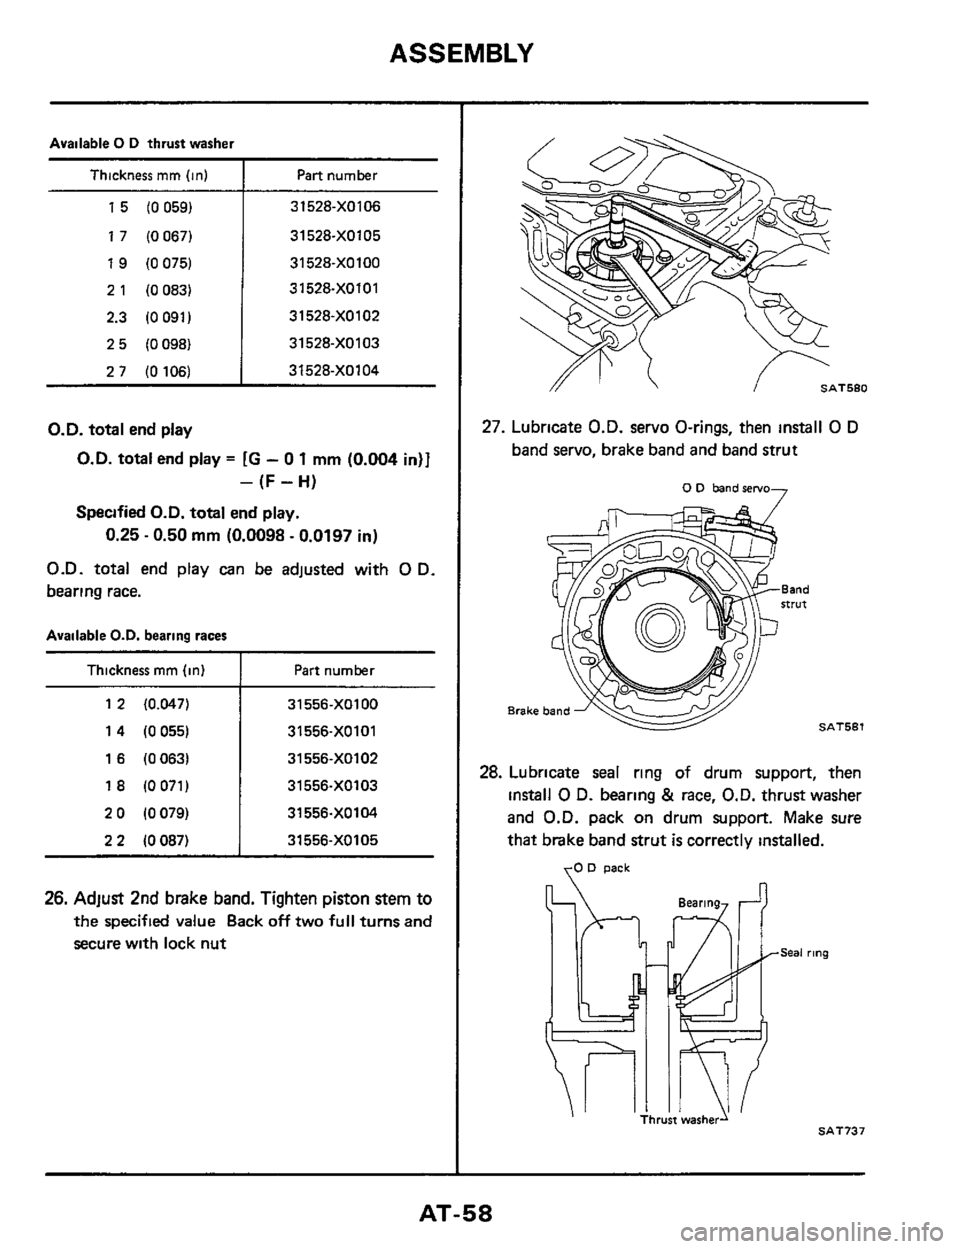 NISSAN 300ZX 1984 Z31 Automatic Transmission Workshop Manual ASSEMBLY 
15 (0 059) 
17 (0 067) 
19 (0 075) 
2 1 (0 083) 
2.3 (0 091) 
25 (0098) 
2 7 (0 106) 
Available 0 D thrust washer 
3 1528-XO106 
31  528-XO105 
31528-X0100 
31  528-X0101 
31 528-XO102 
3152